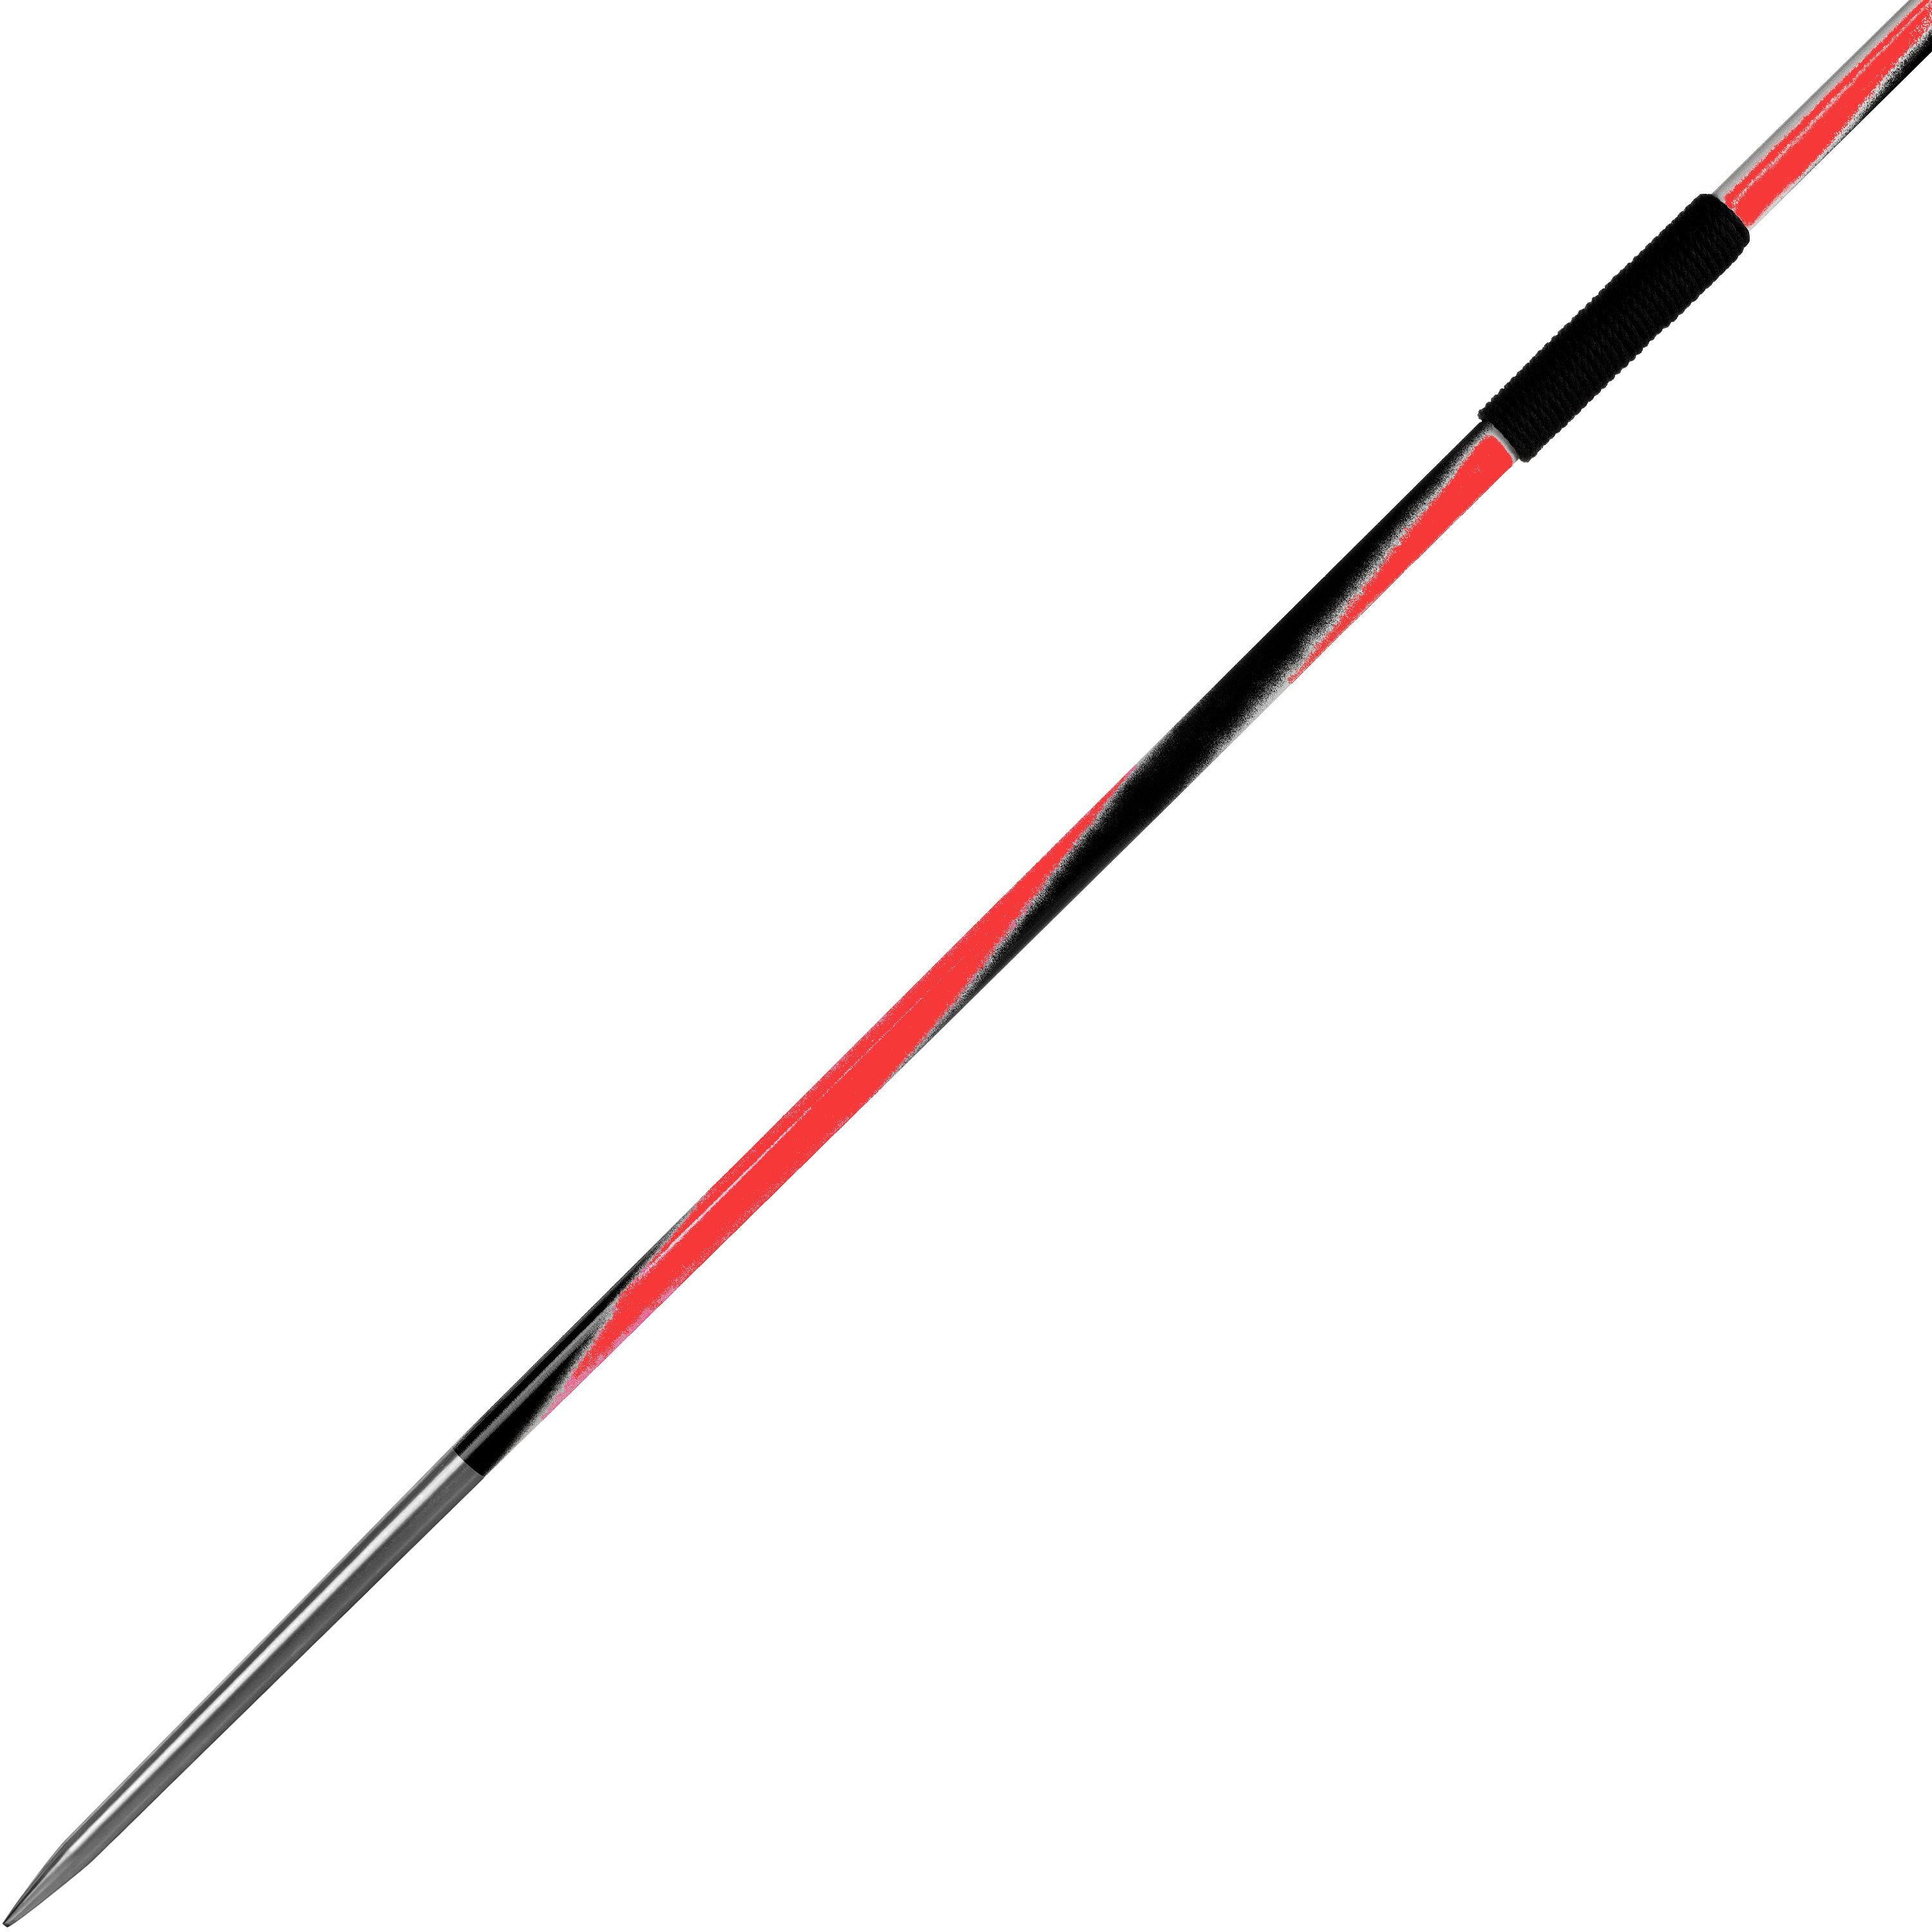 4Throws Competition and Elite Javelins